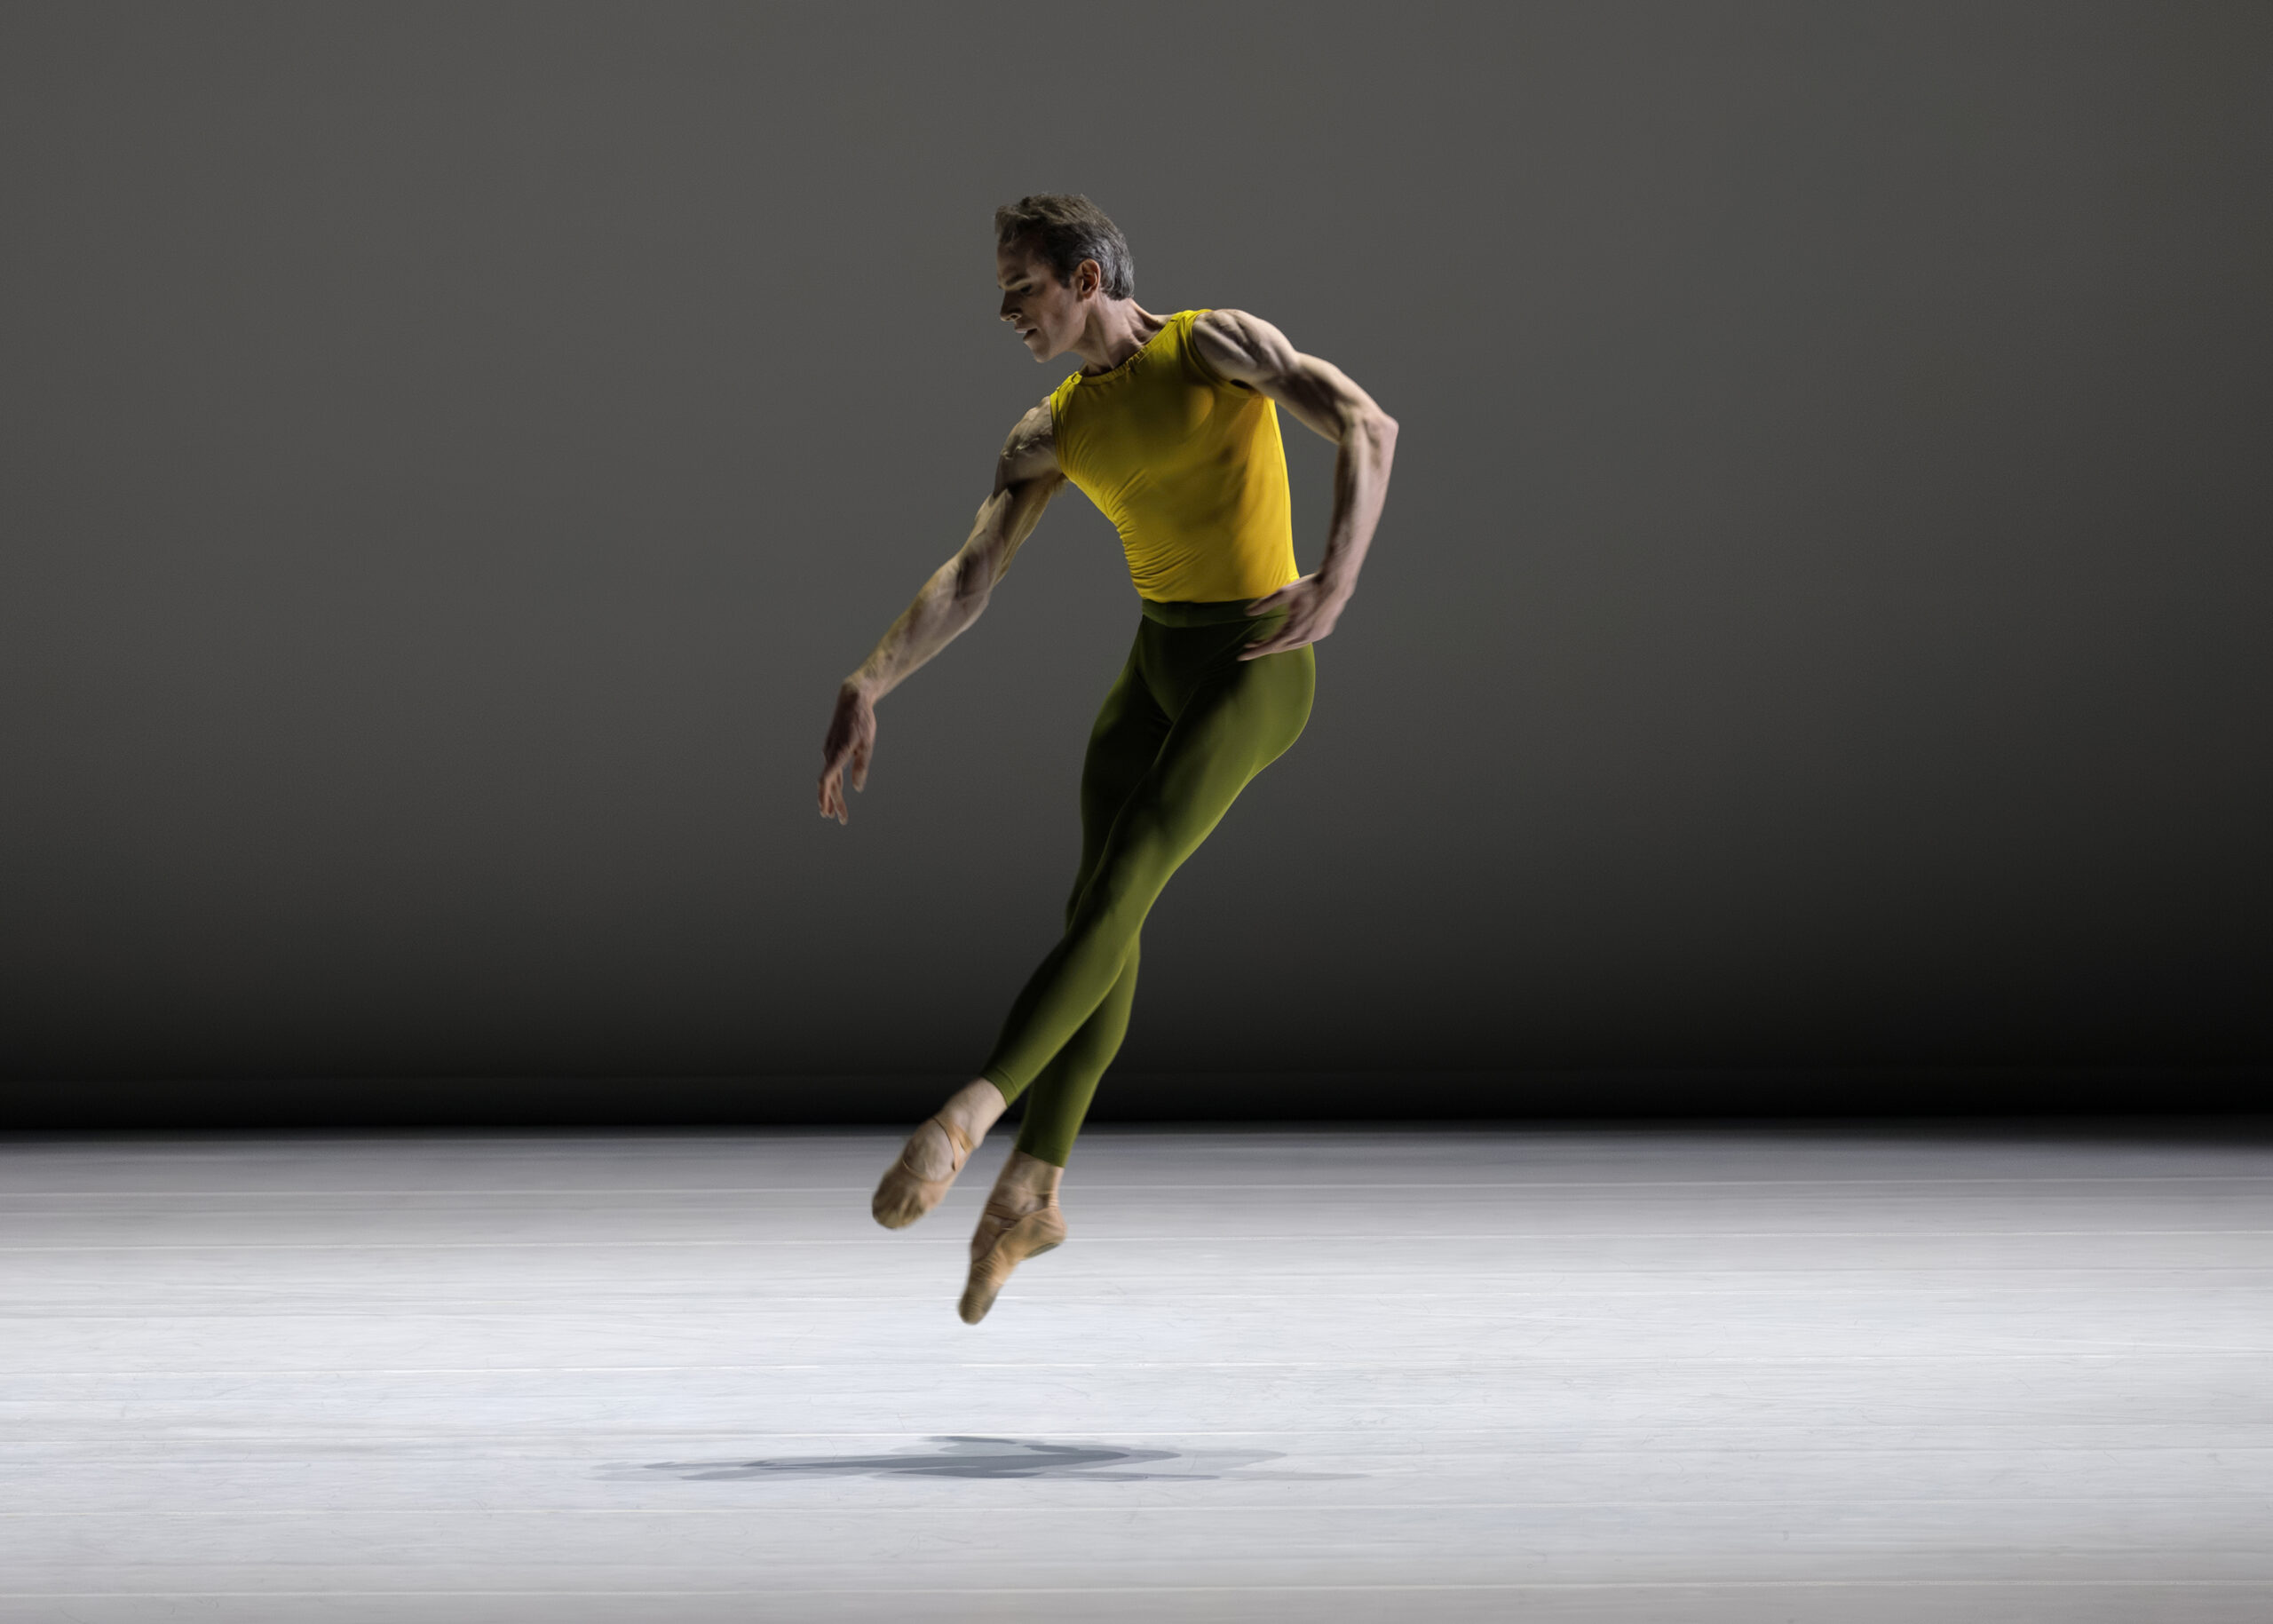 Russell Janzen hovers above the floor, feet crossed in a low fifth. He arches forward slightly, looking out over an arm extended in parallel to his legs. He wears a fitted yellow top and dark green tights. The backdrop is dark grey; he casts a shadow on the pale grey marley.